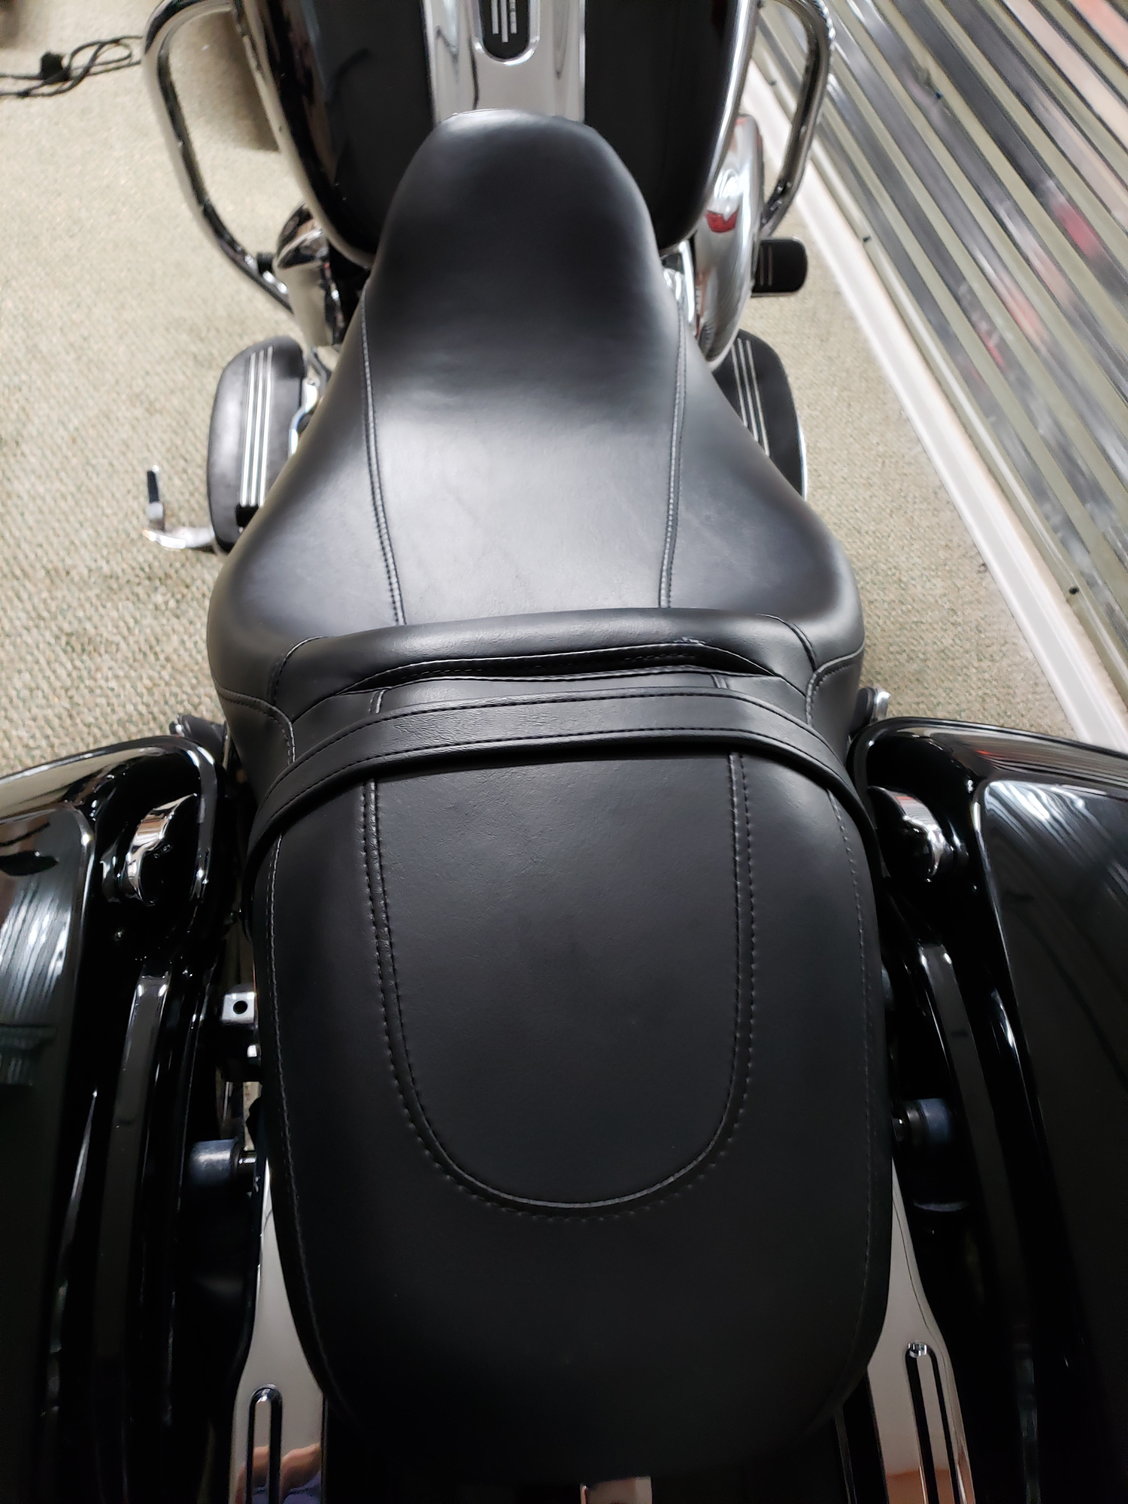 Brand new Seat off of Street Glide Special - Harley Davidson Forums